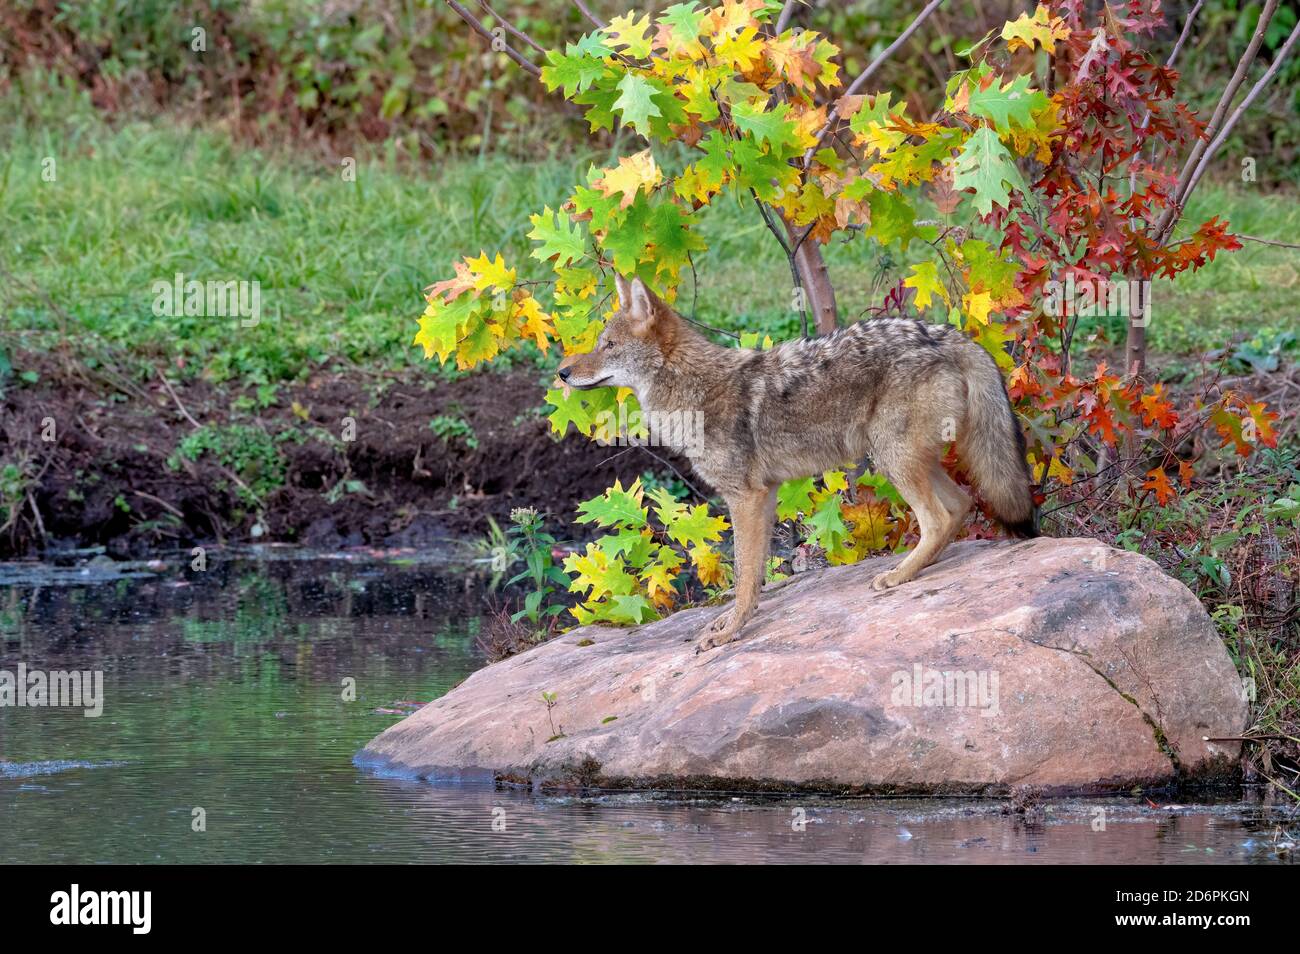 Coyote standing on a Boulder near Water in Autumn Stock Photo